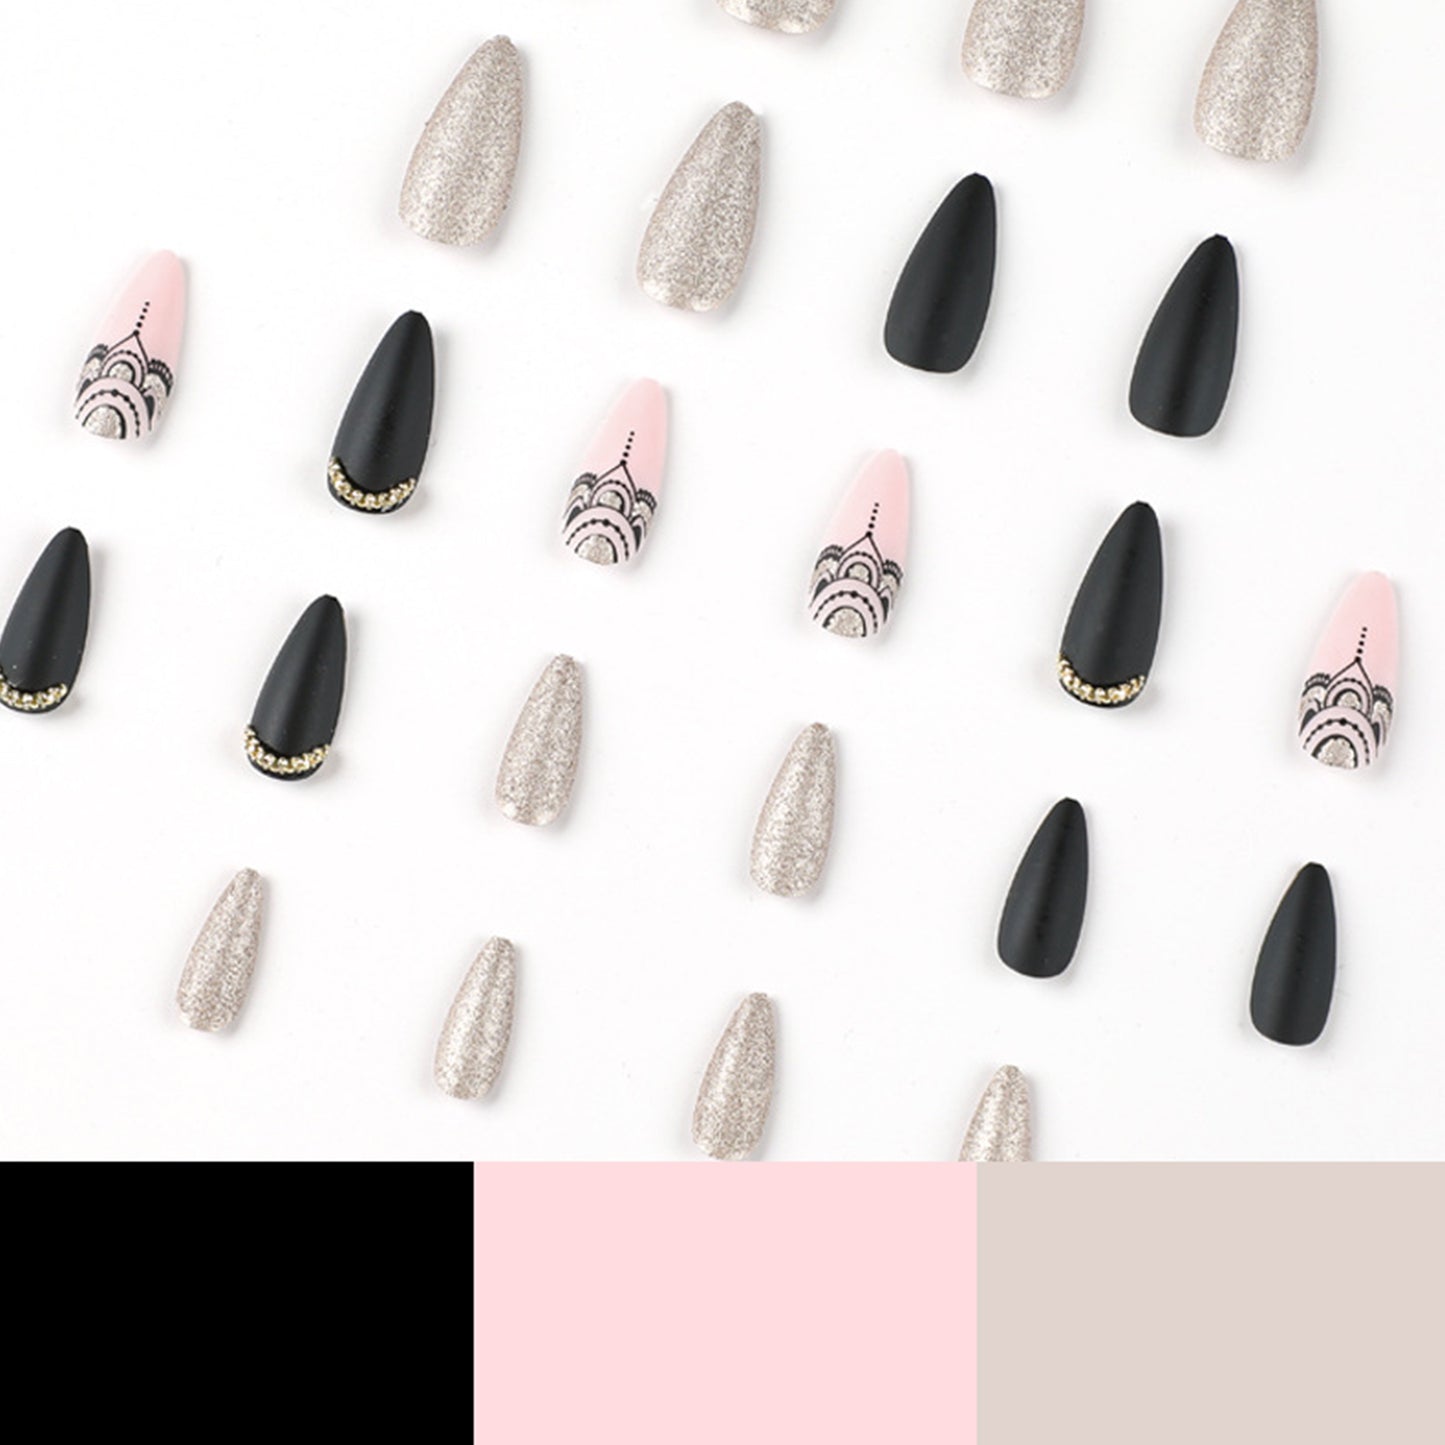 Matte Black Pointed Press-on Nails